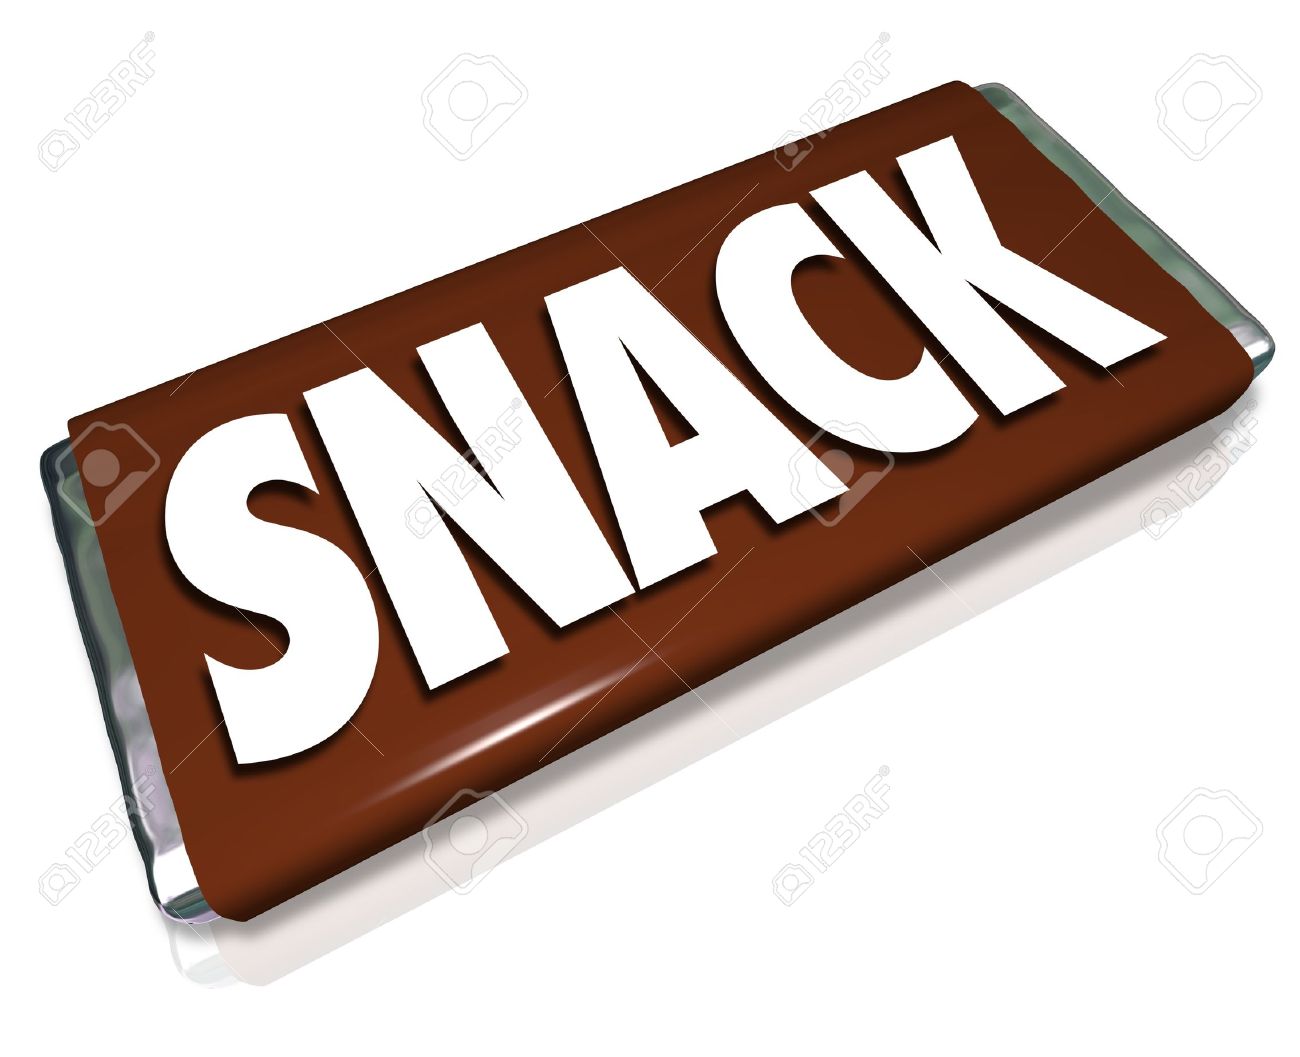 14783233-A-brown-chocolate-candy-bar-wrapper-with-the-word-Snack-illustrating-junk-food-high-calorie-snacks-t-Stock-Photo.jpg